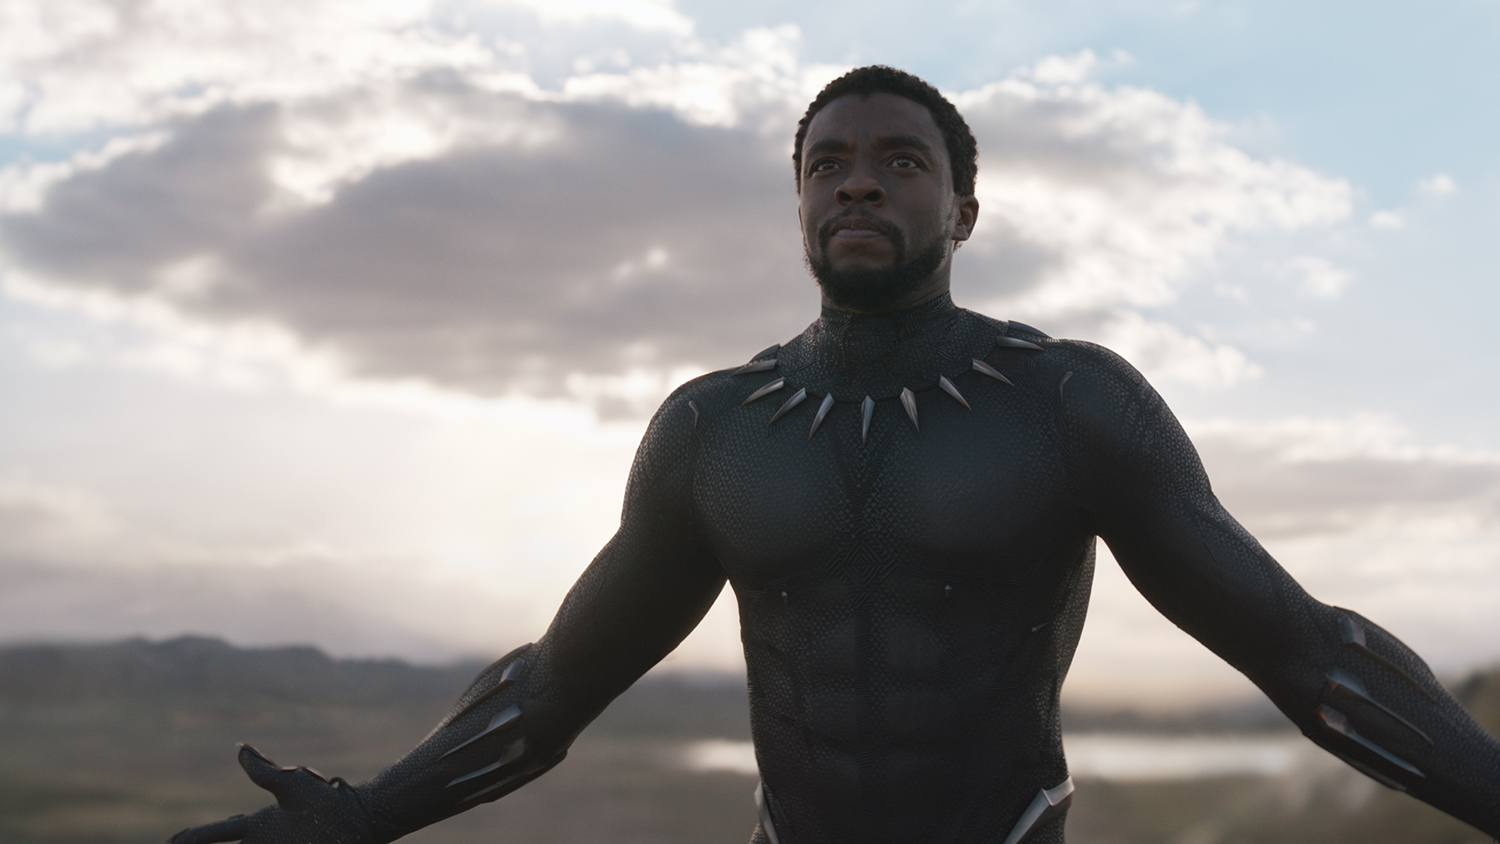 black panther review blackpanther596d2f02625fd